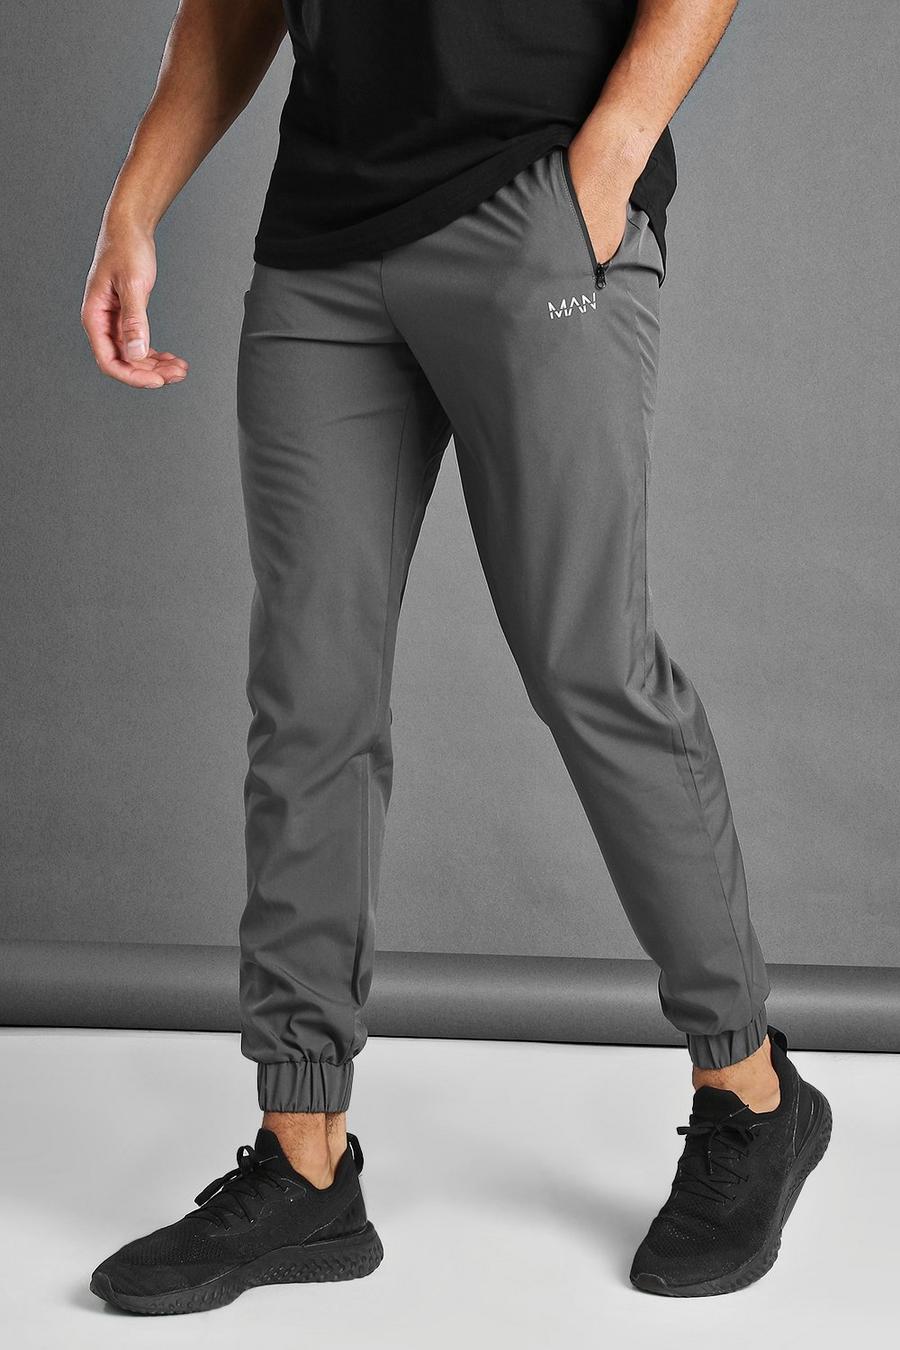 BERG tracksuit and joggers discount 71% MEN FASHION Trousers Sports Gray XL 